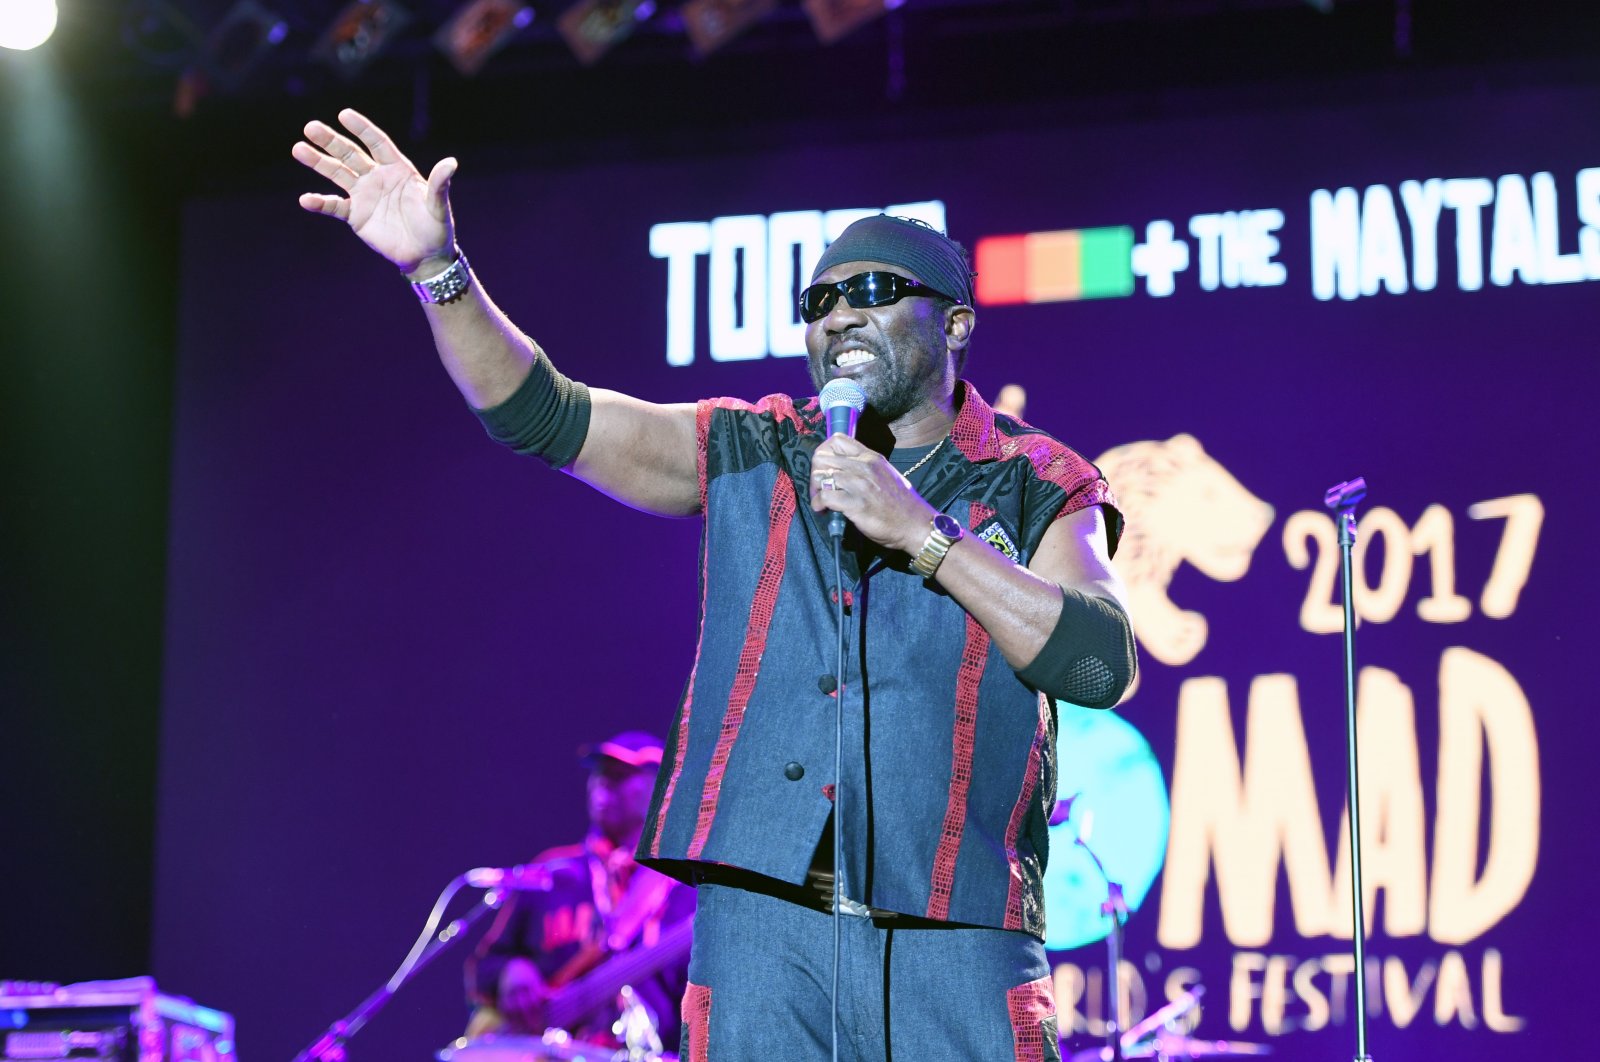 Jamaican singer Toots Hibbert of Toots and the Maytals performs at the Womad Festival at Charlton Park in Wiltshire on July 29, 2017 (Reuters Photo)